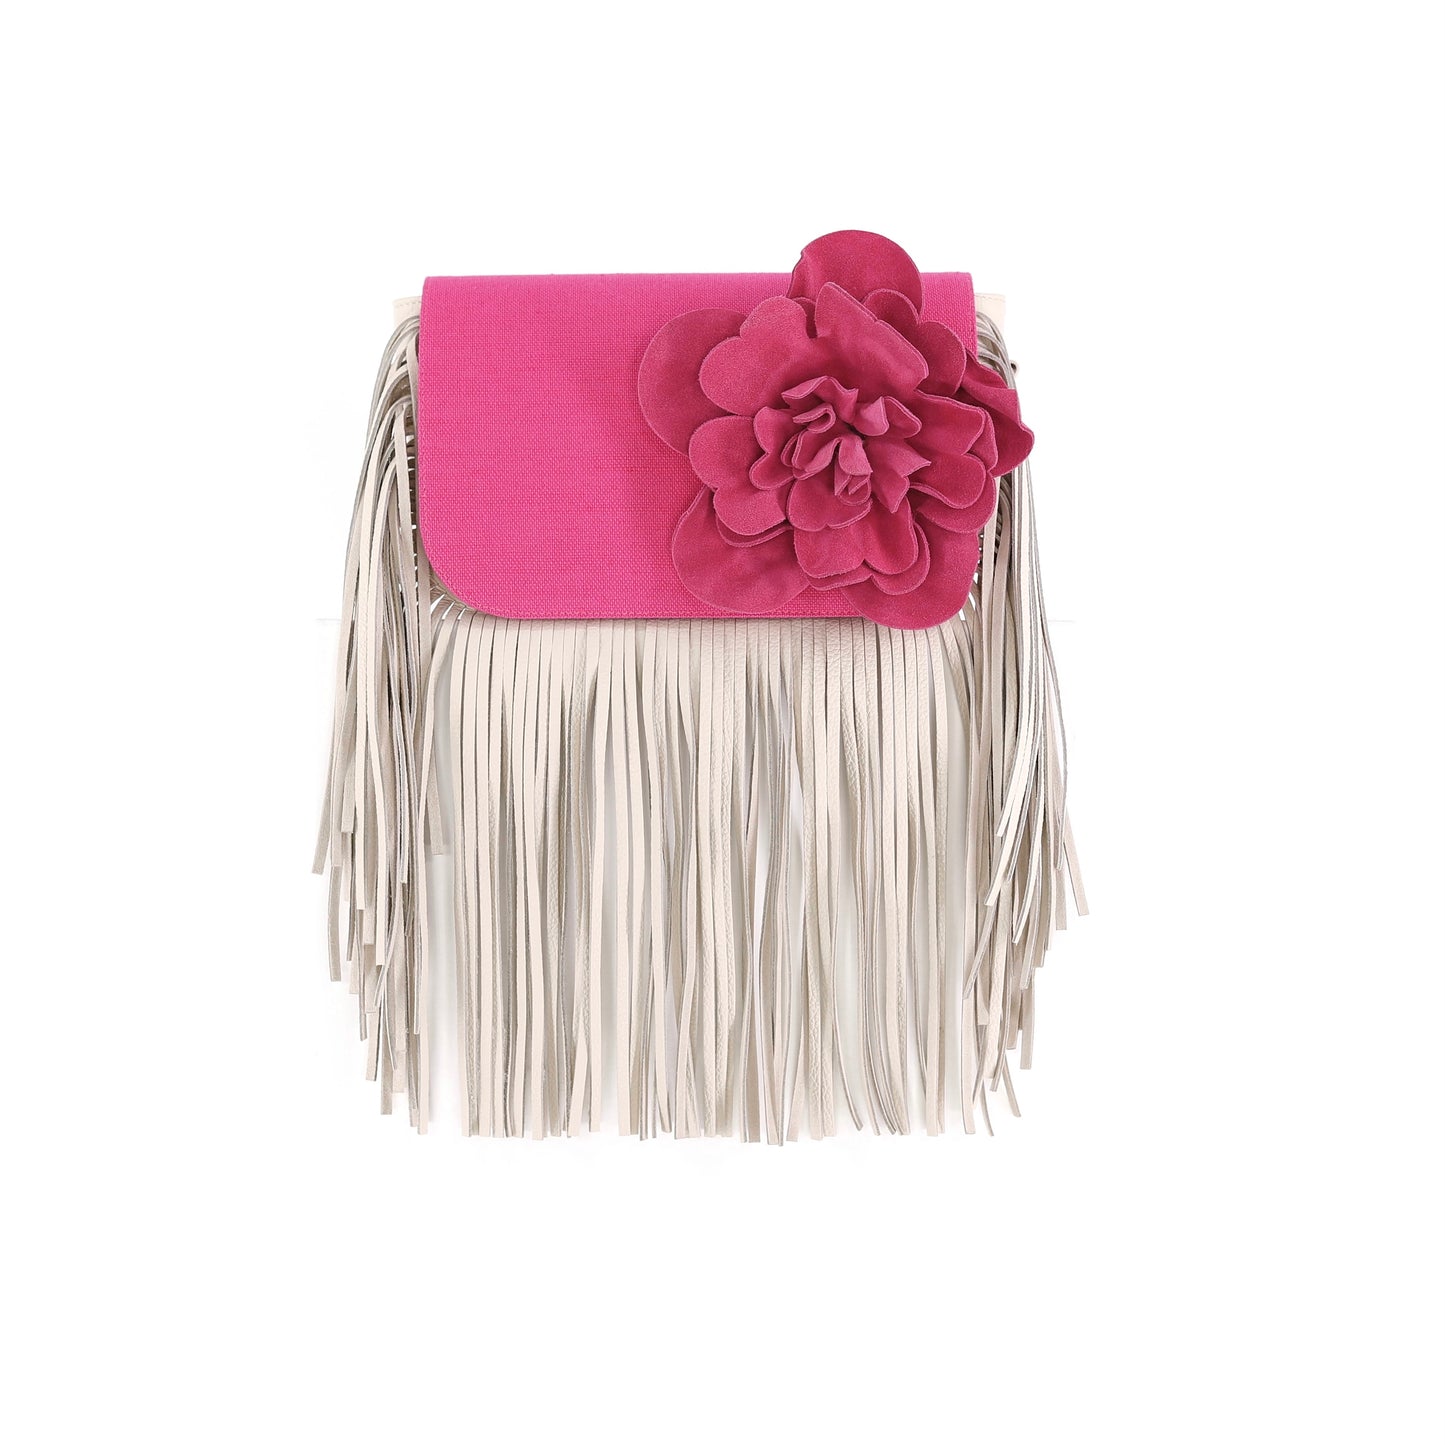 GABRIELLE handbag with fringes genuine leather beige small